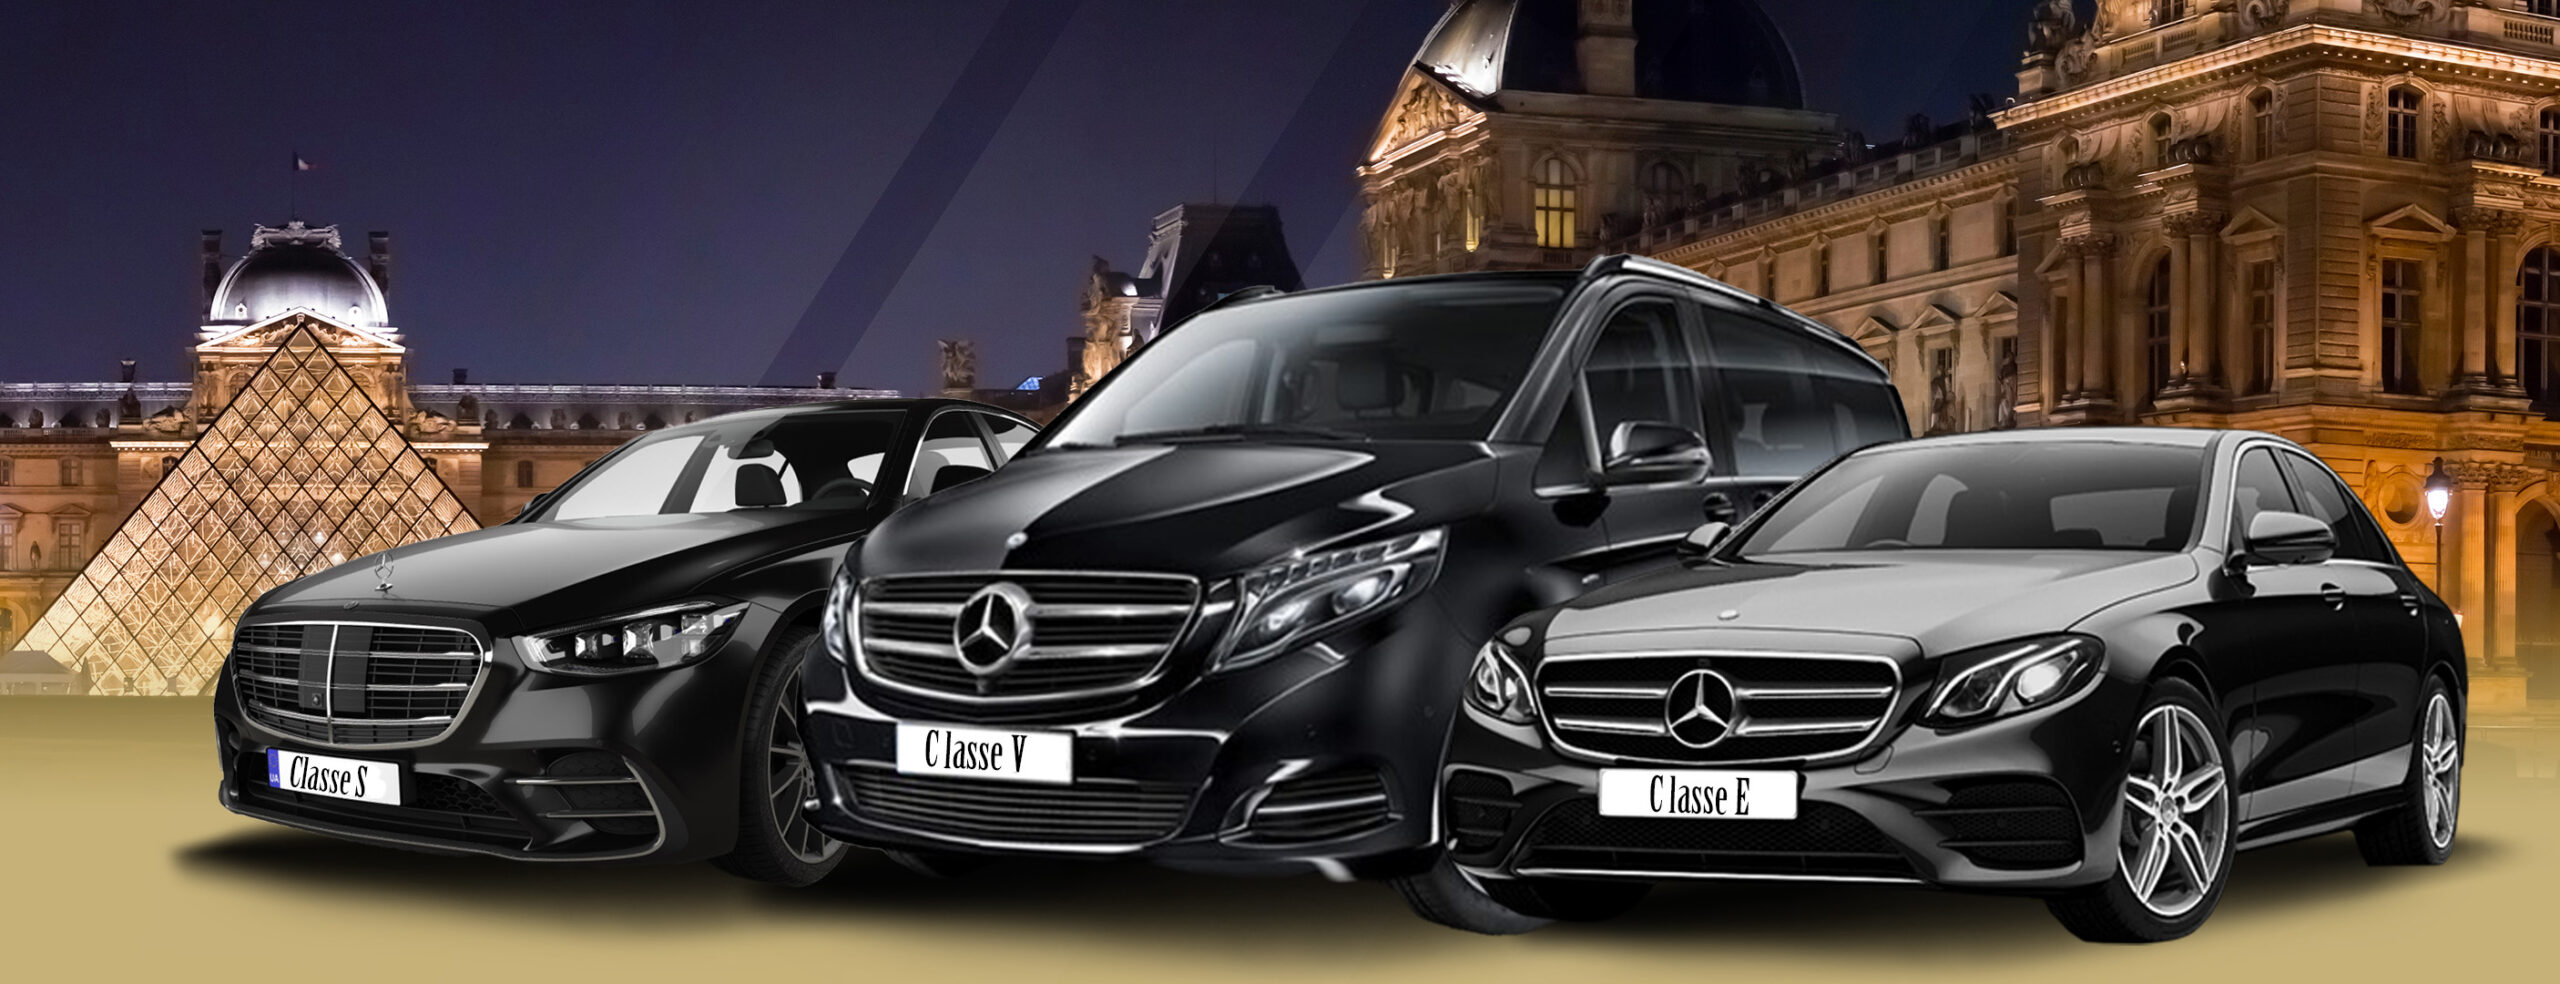 paris by ls offers a luxury chauffeur service to the passenegrs. VIP, tourist, Business man; woman, we adapt to our passenegrs and provide luxuru e class s class and v class vehicles